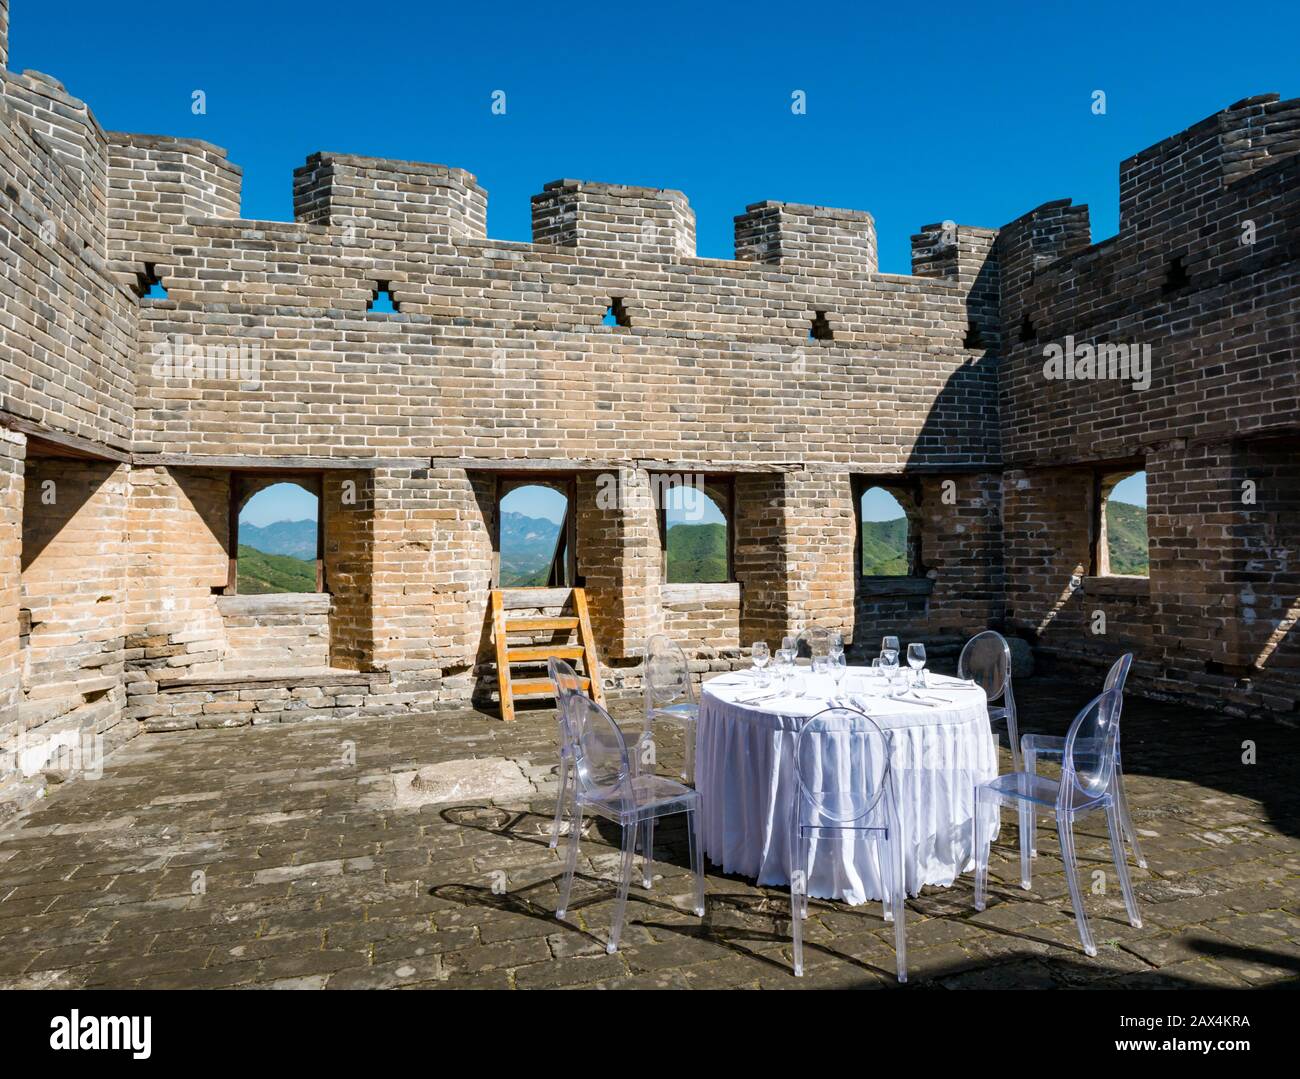 Table set up for formal dining occasion in open air crenellated watchtower, Jinshanling Great Wall of China, People’s Republic of China, Asia Stock Photo